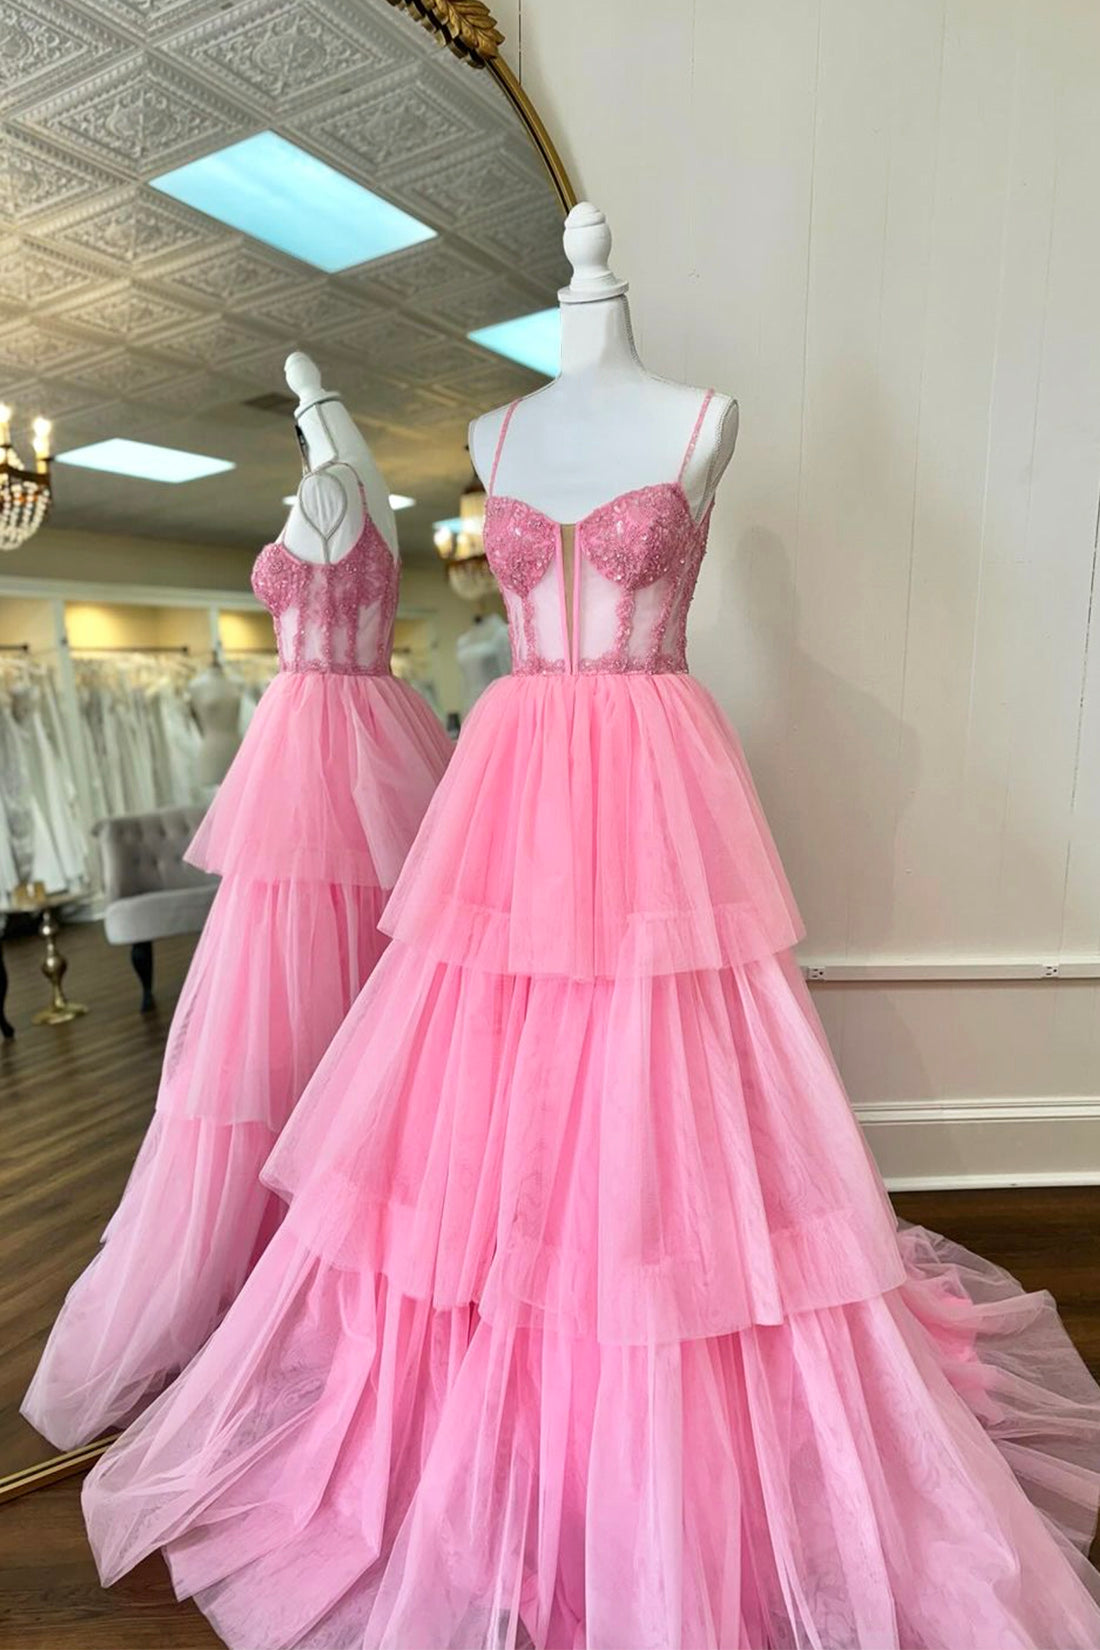 Pink Tulle Lace Long Prom Dress, A-Line Spaghetti Strap Evening Party Dress